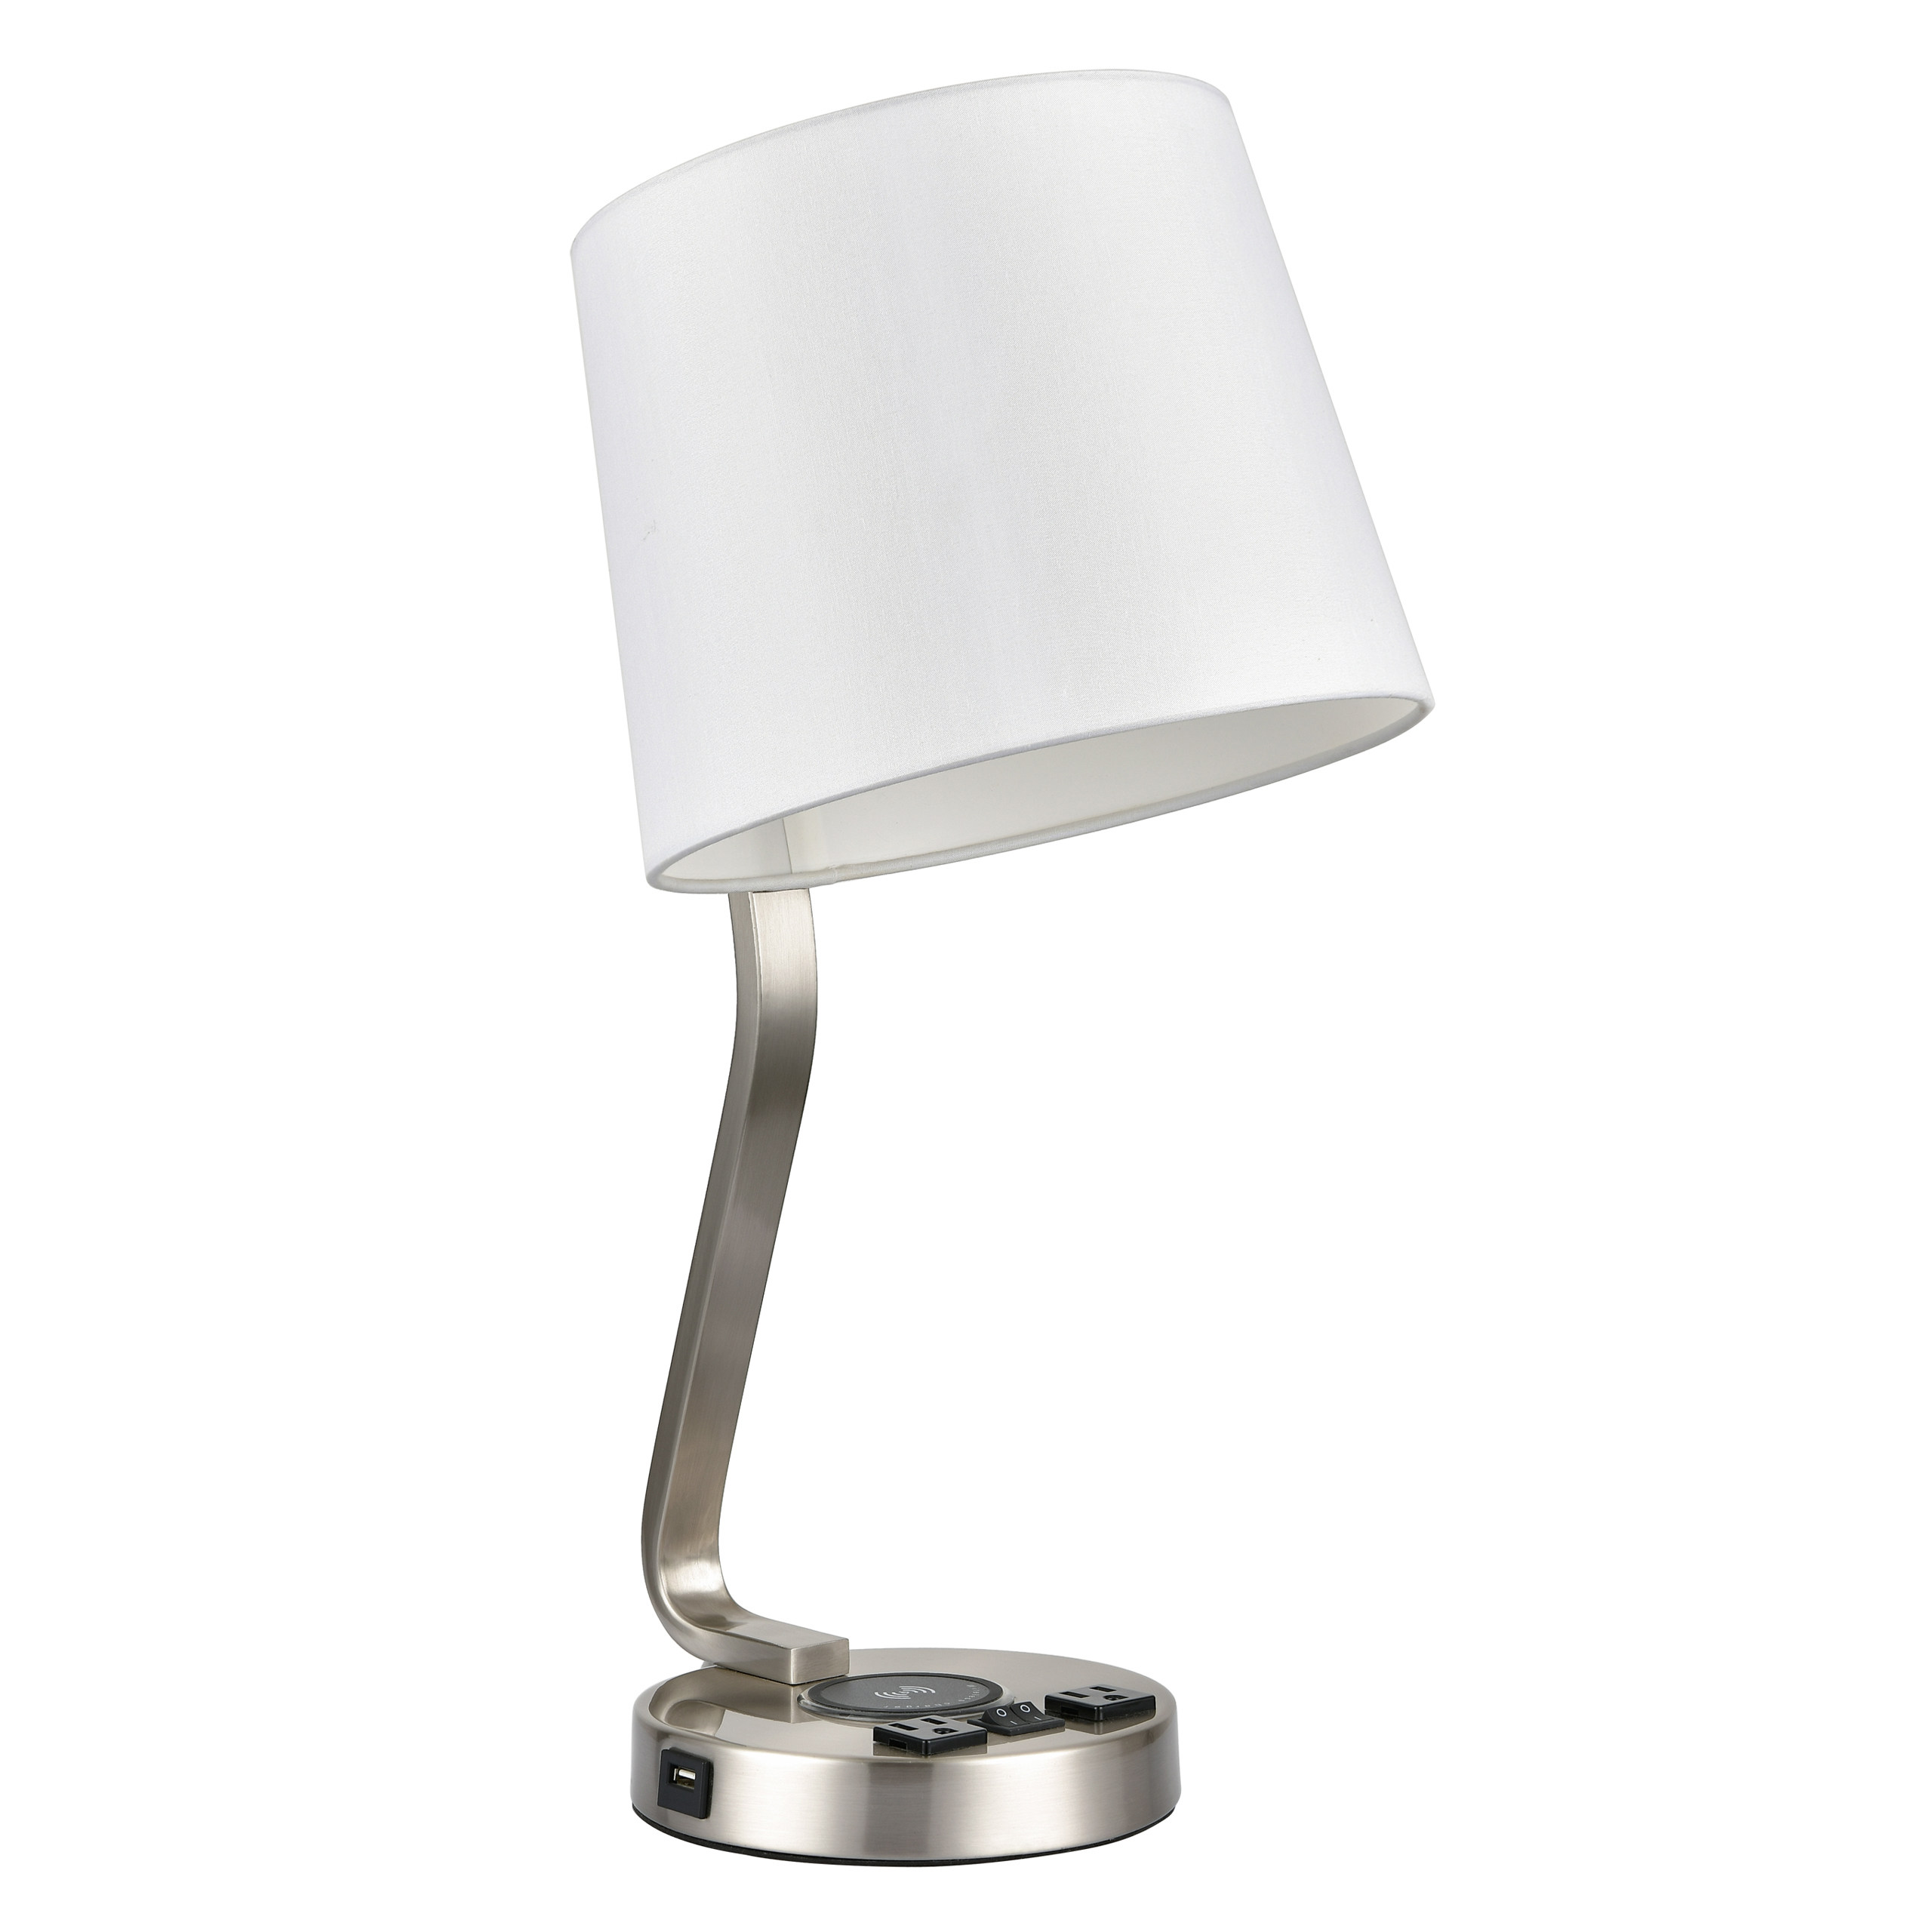 Brushed Nickel Table Lamp with two Outlet